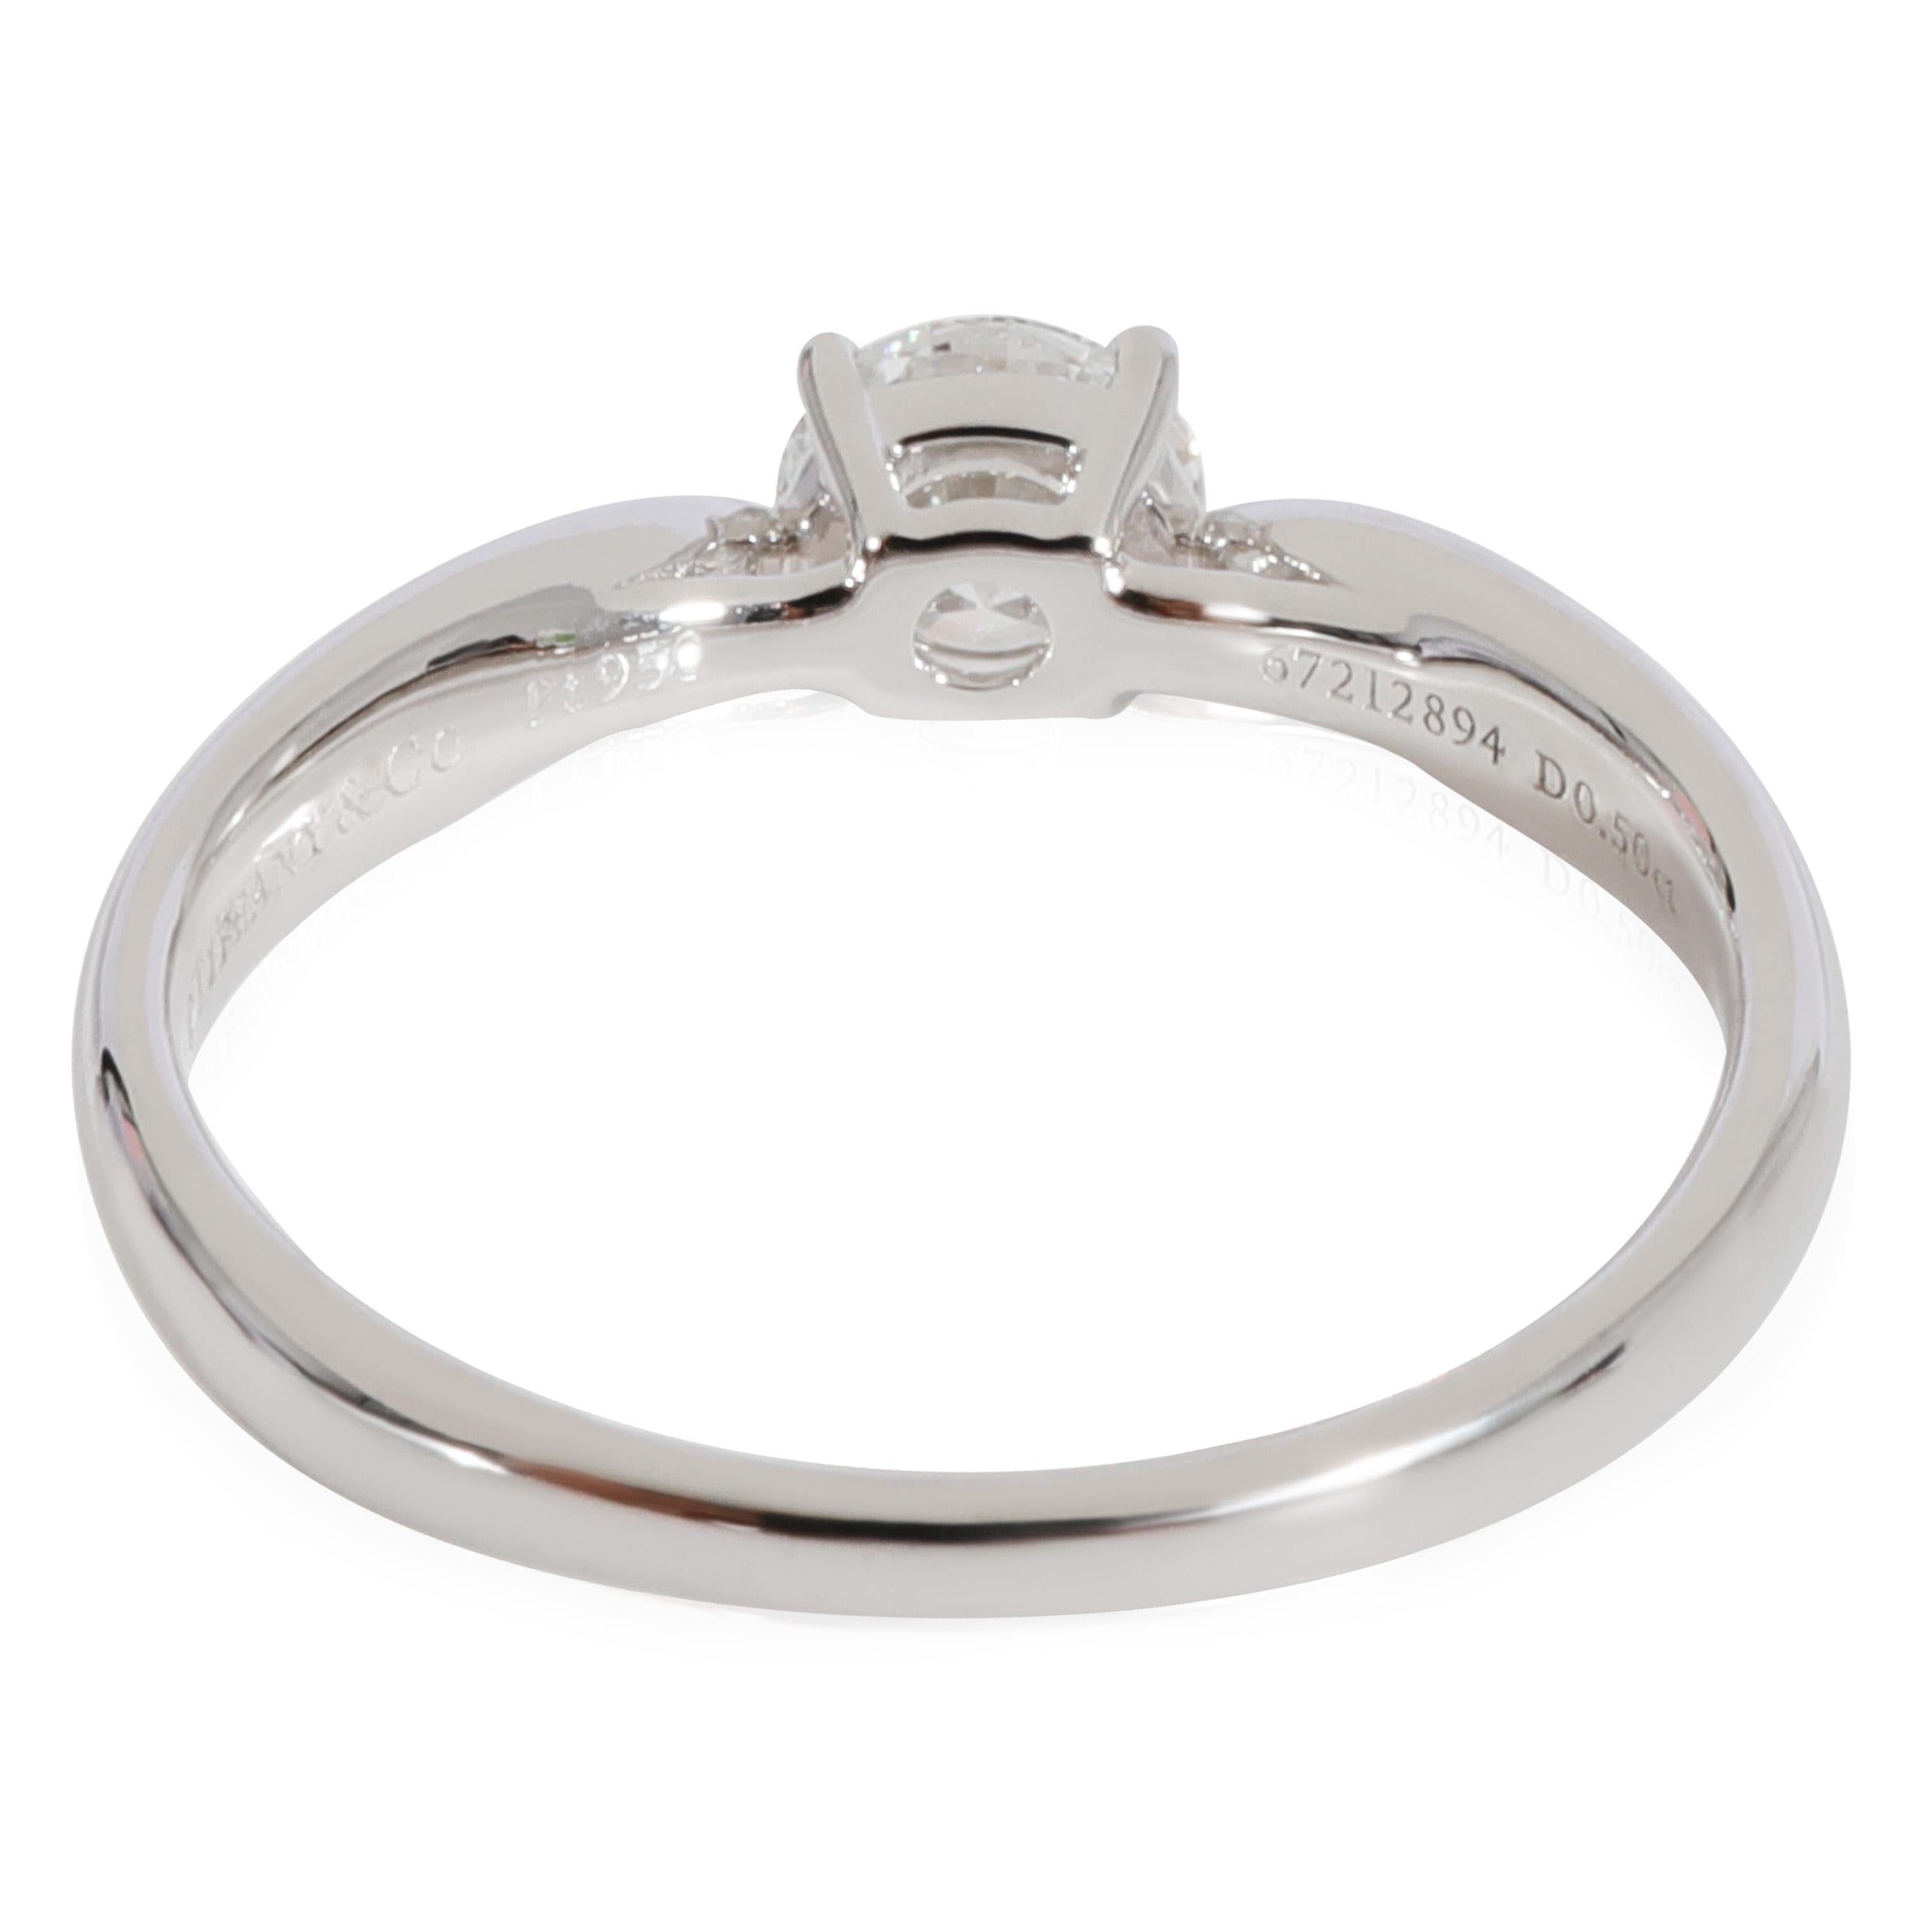 Tiffany & Co. Harmony Diamond Engagement Ring in Platinum E VVS1 0.5 CTW

PRIMARY DETAILS
SKU: 124907
Listing Title: Tiffany & Co. Harmony Diamond Engagement Ring in Platinum E VVS1 0.5 CTW
Condition Description: Retails for 7050 USD. In excellent